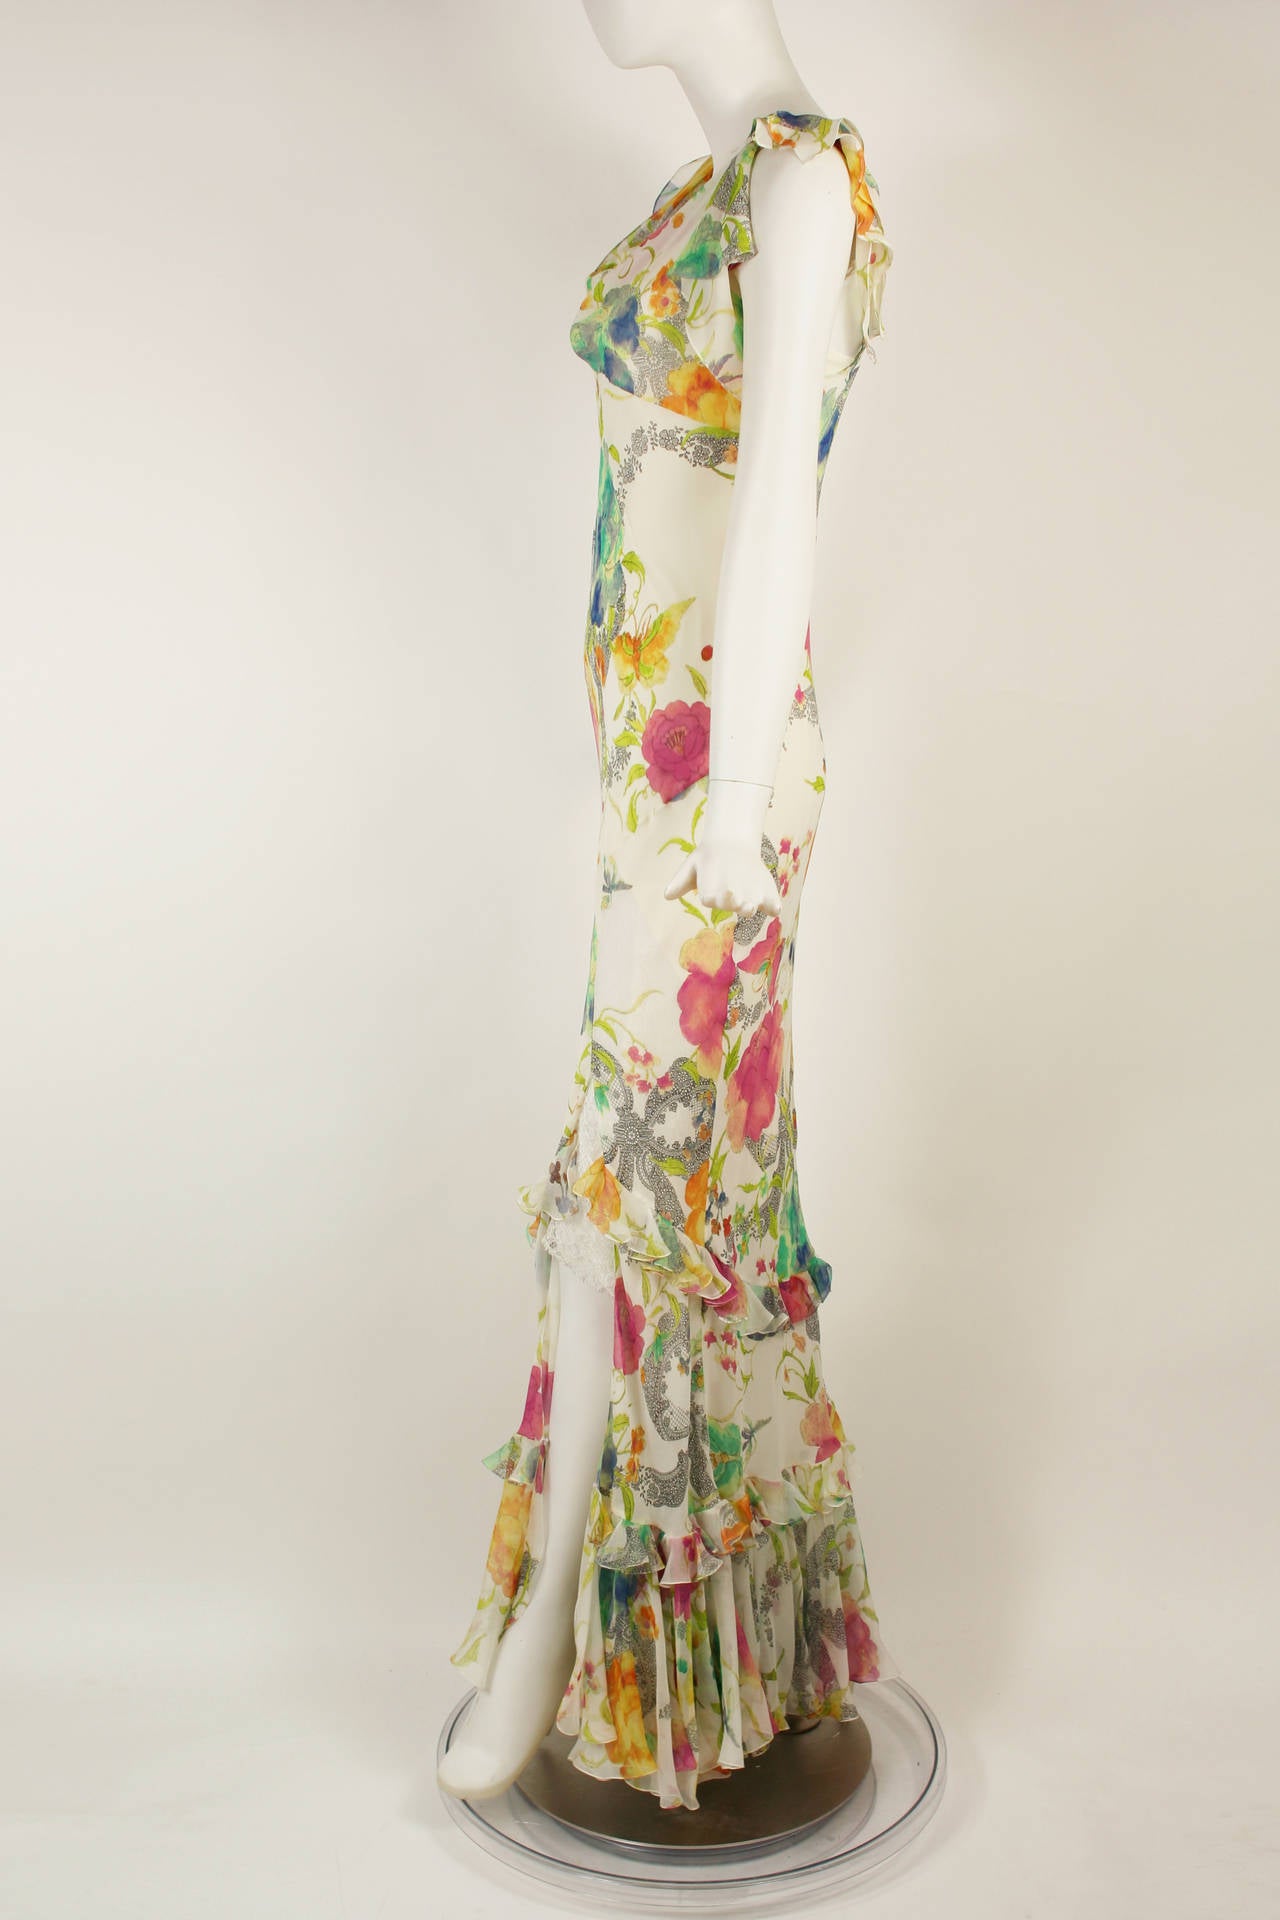 Christian Dior Floral Bias Cut Chiffon Dress / Wedding In Excellent Condition For Sale In New York, NY